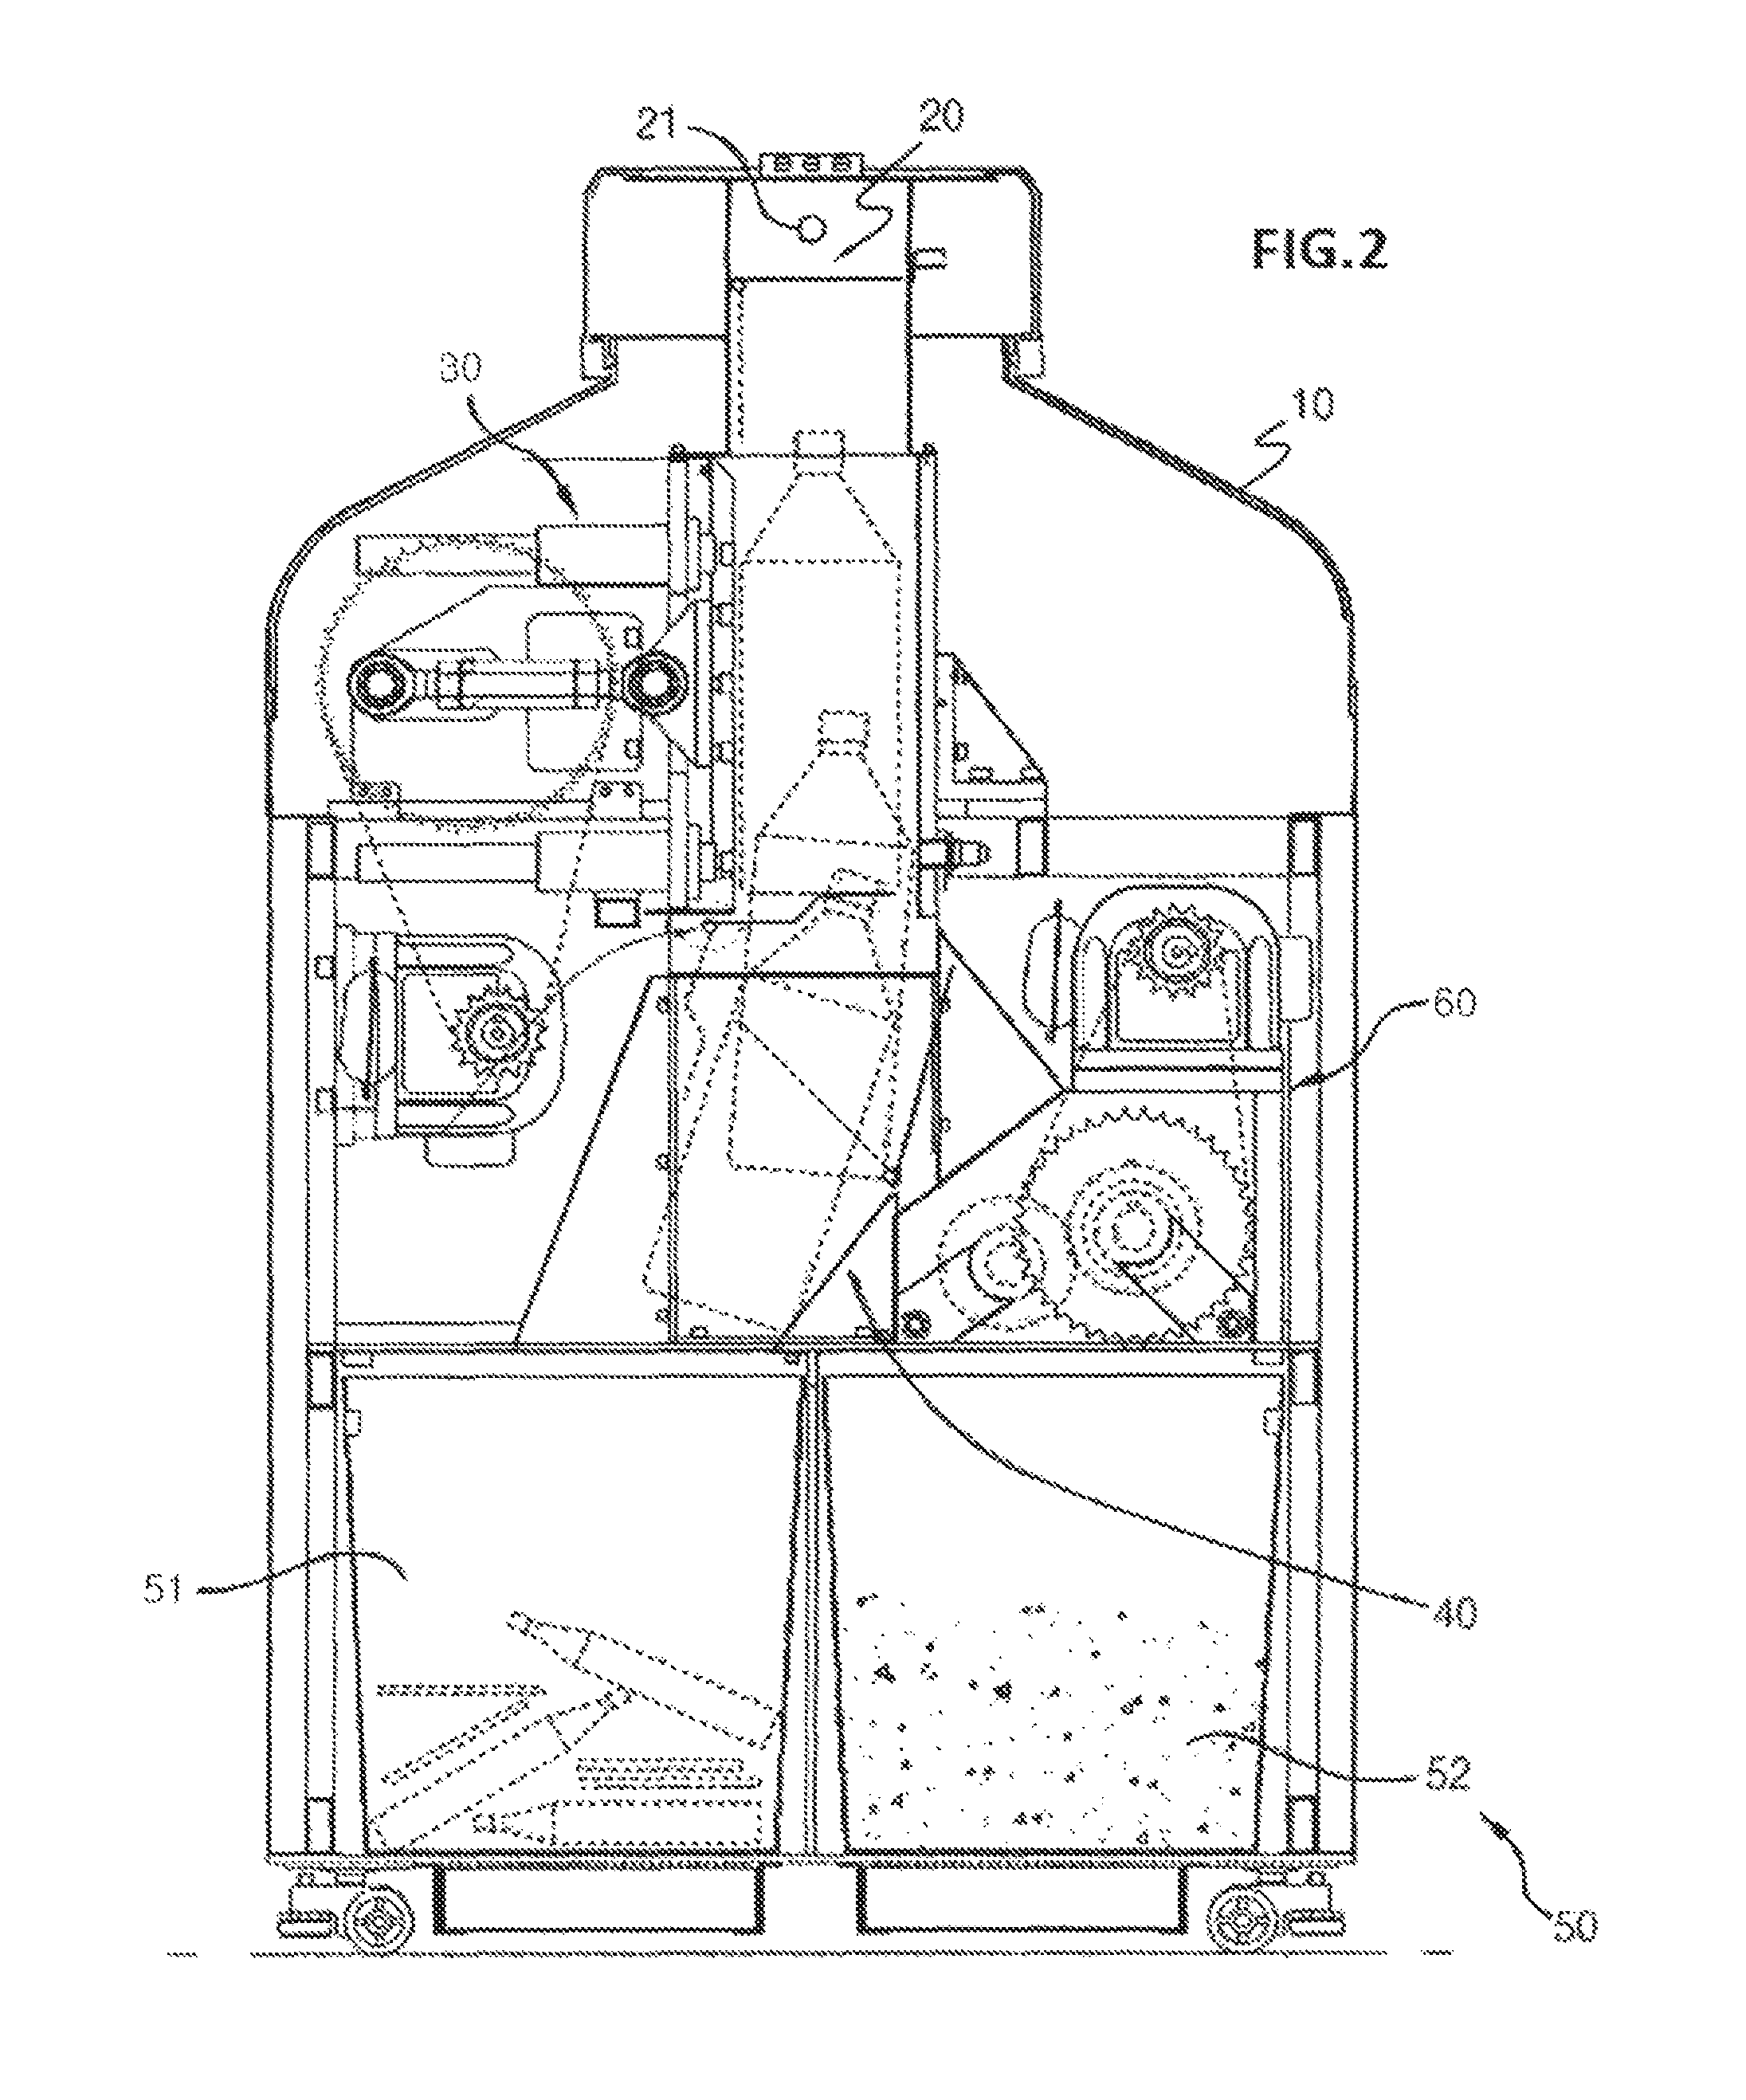 Selective collection system for recycling input materials having a monitor